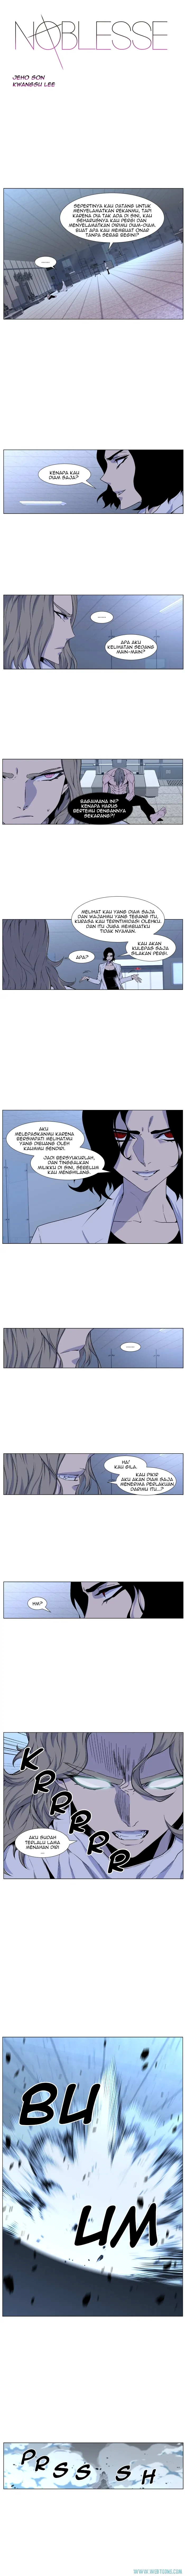 Noblesse Chapter 429 - 49